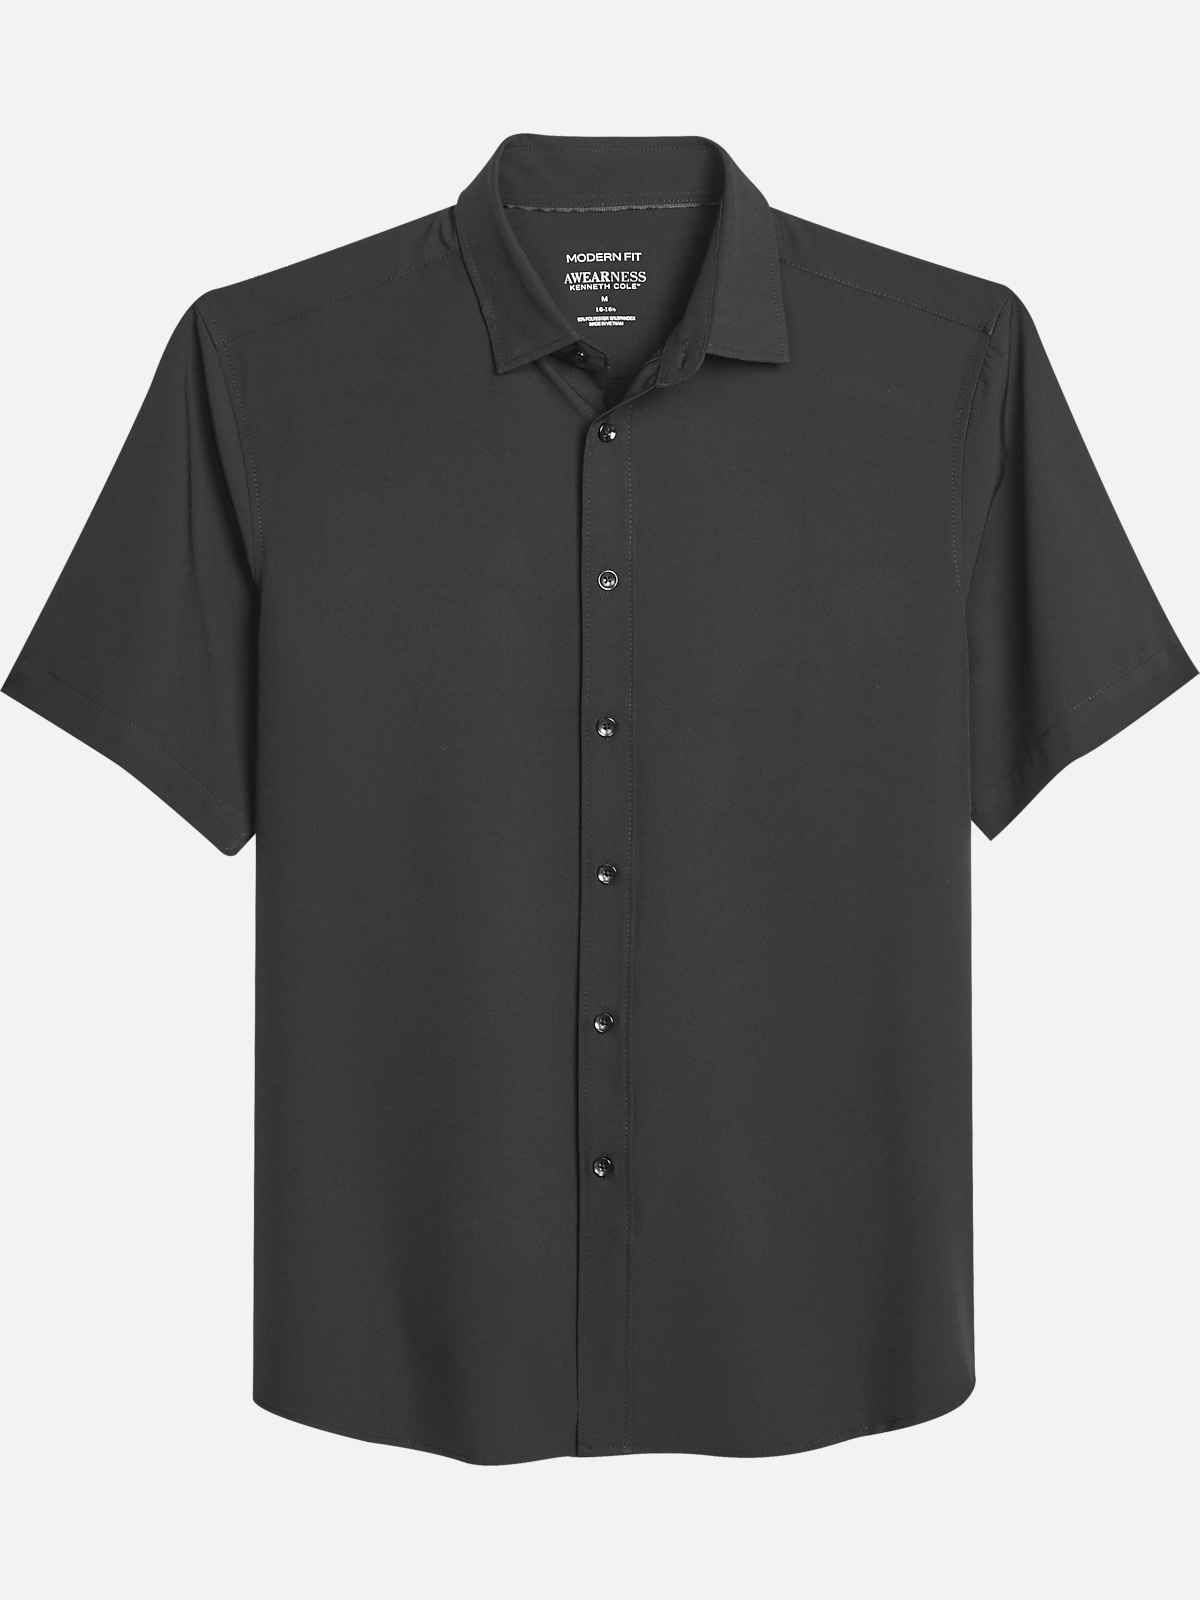 Awearness Kenneth Cole Modern Fit Performance 4-Way Stretch Sport Shirt ...